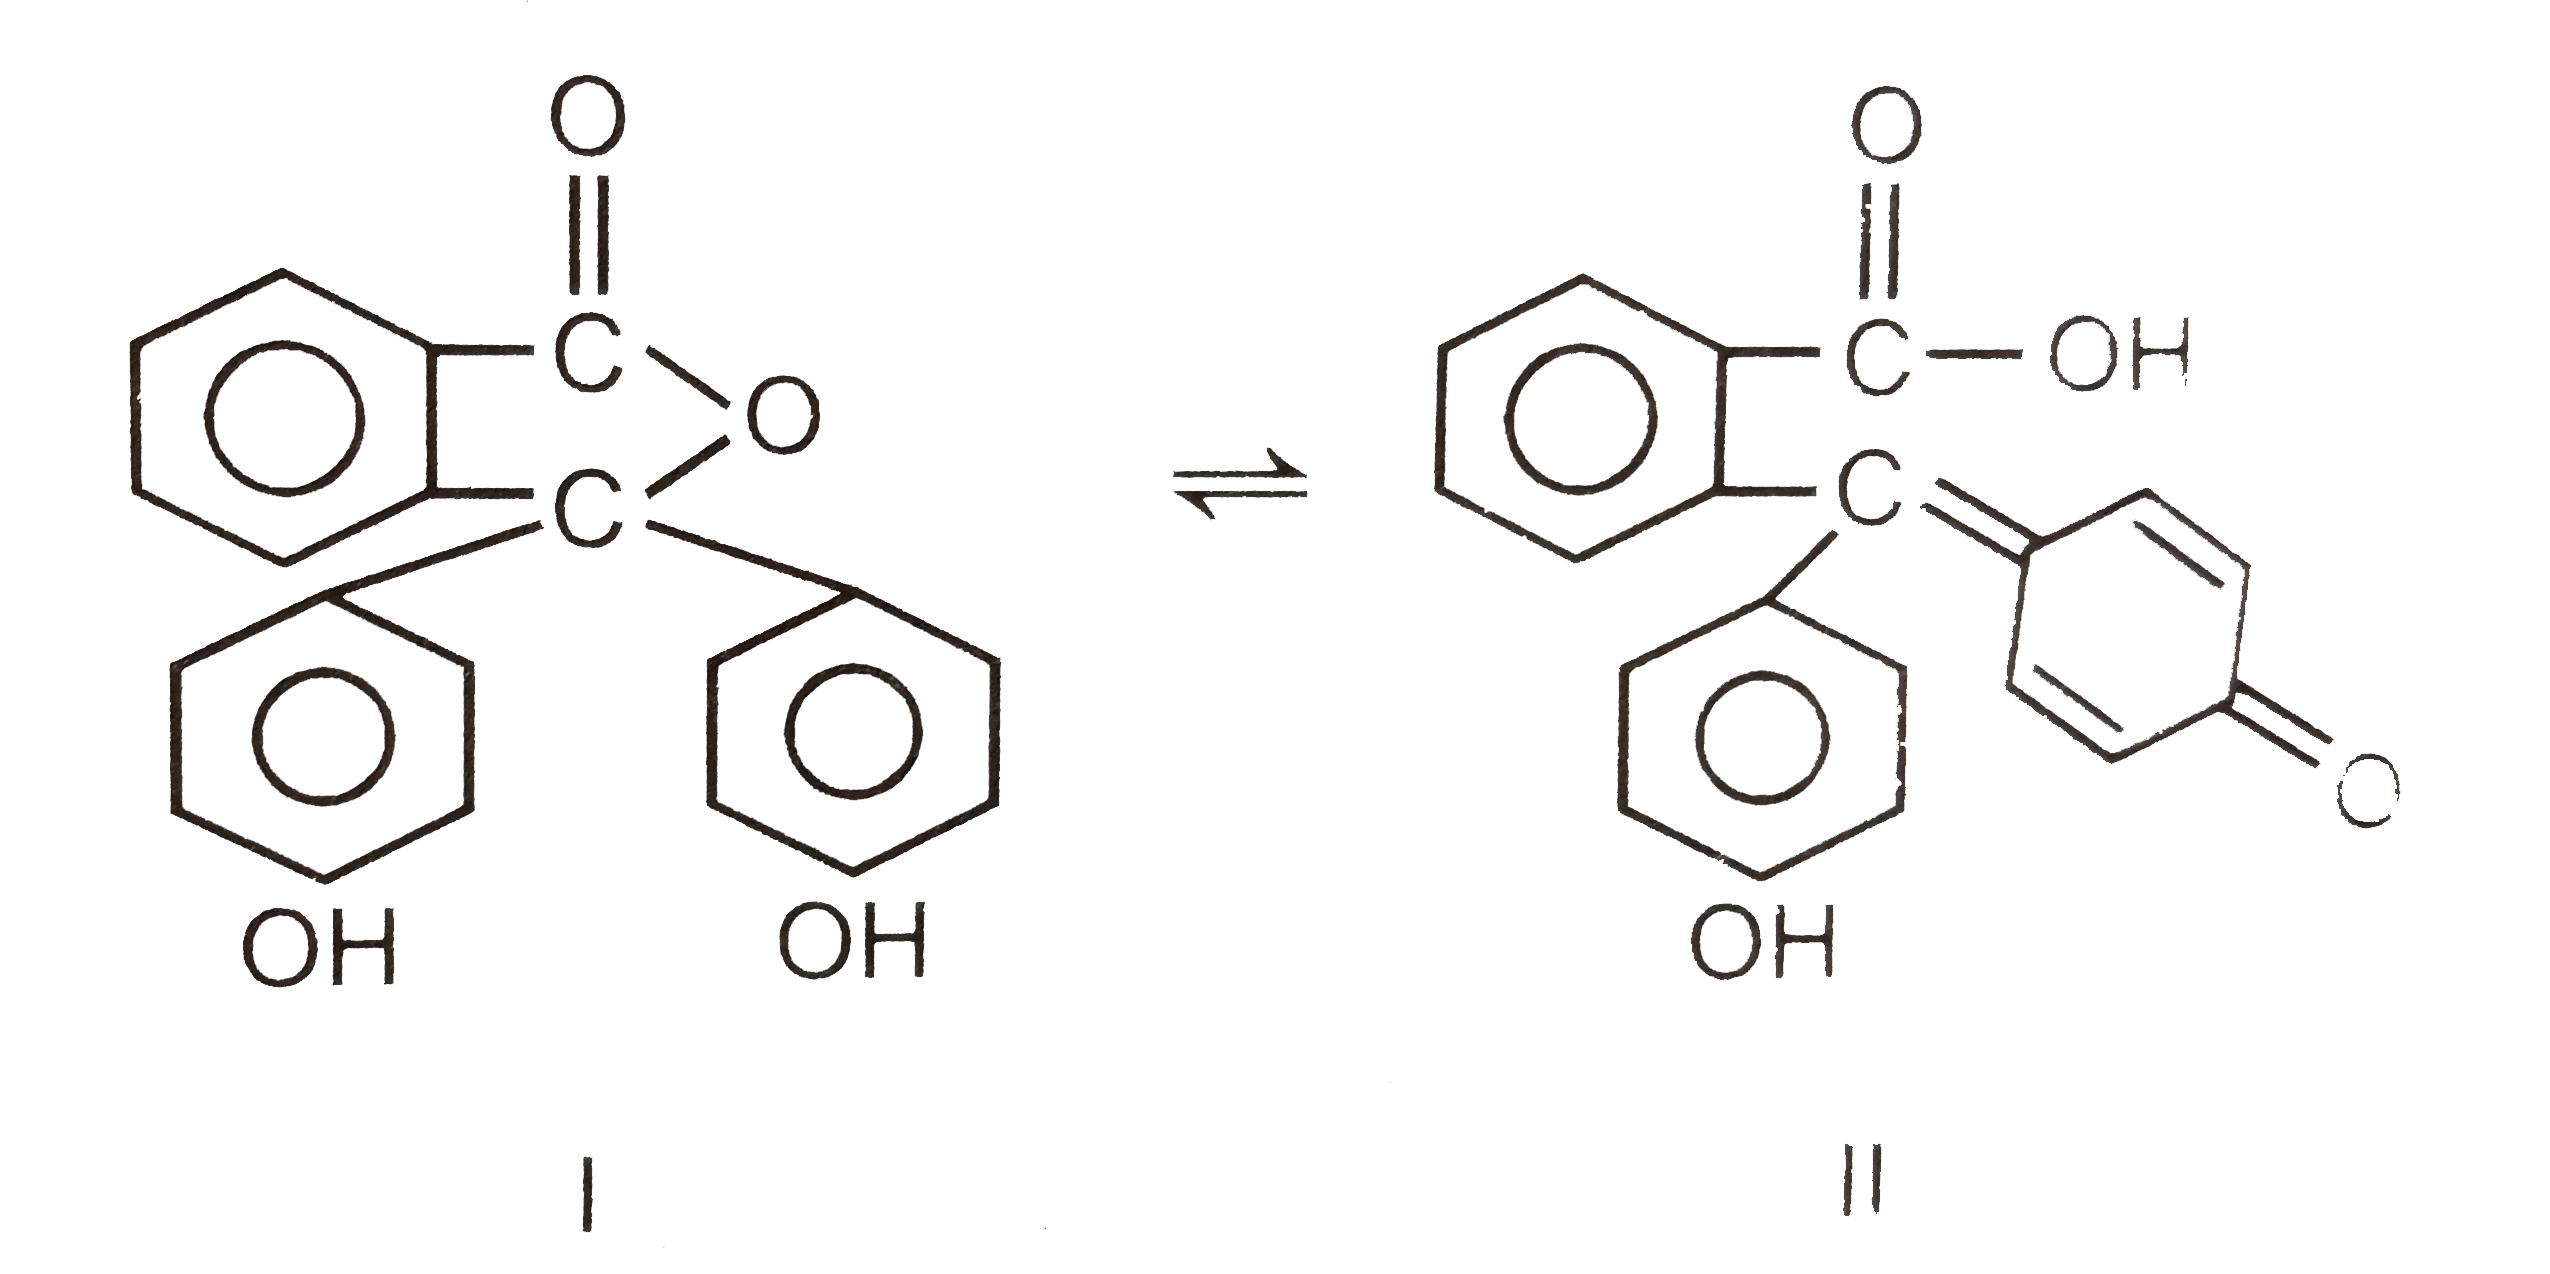 During neutralisation of an acid by a base, the end point refers for the completion of reaction. The detection of end point in acid -base neutralisation is usually made by an acid-base indicator. An acid-base indicator is itself a weak acid (Phenolphthlein) or a weak base (Mrthyl orange). At about 50% ionisation which depends on the medium, the anion furnished by an indicator (acid) or cation furnished by indicator (basic) imparts its characteristic colour to solution at point. For example phenolphthalein, the dissociation is   underset(